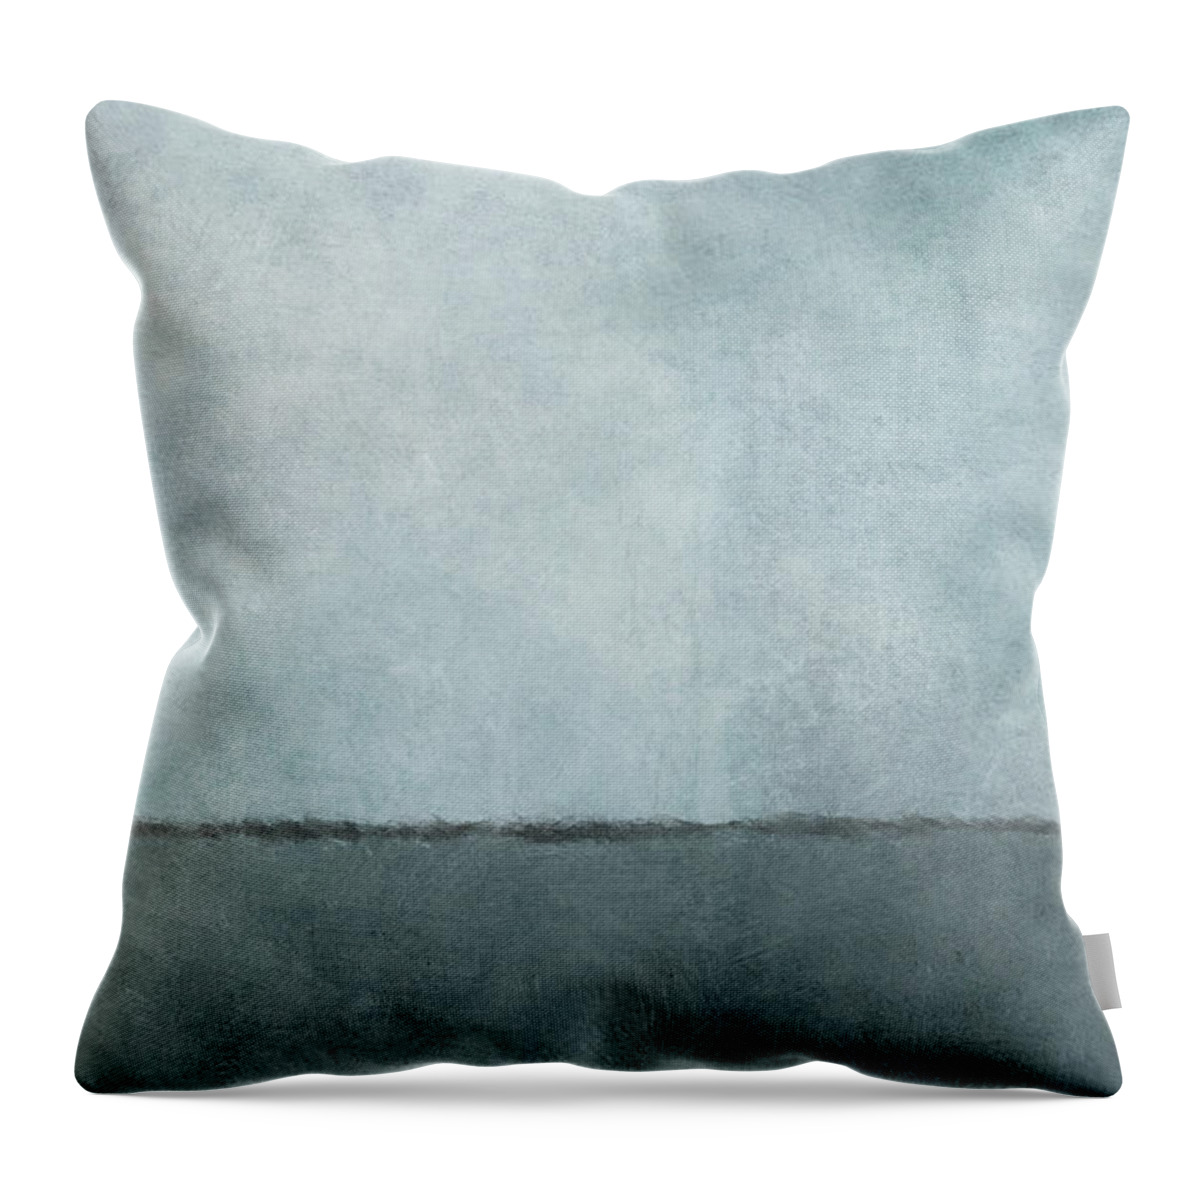 Abstract Throw Pillow featuring the digital art Landscape in Blue Gray by Shawn Conn